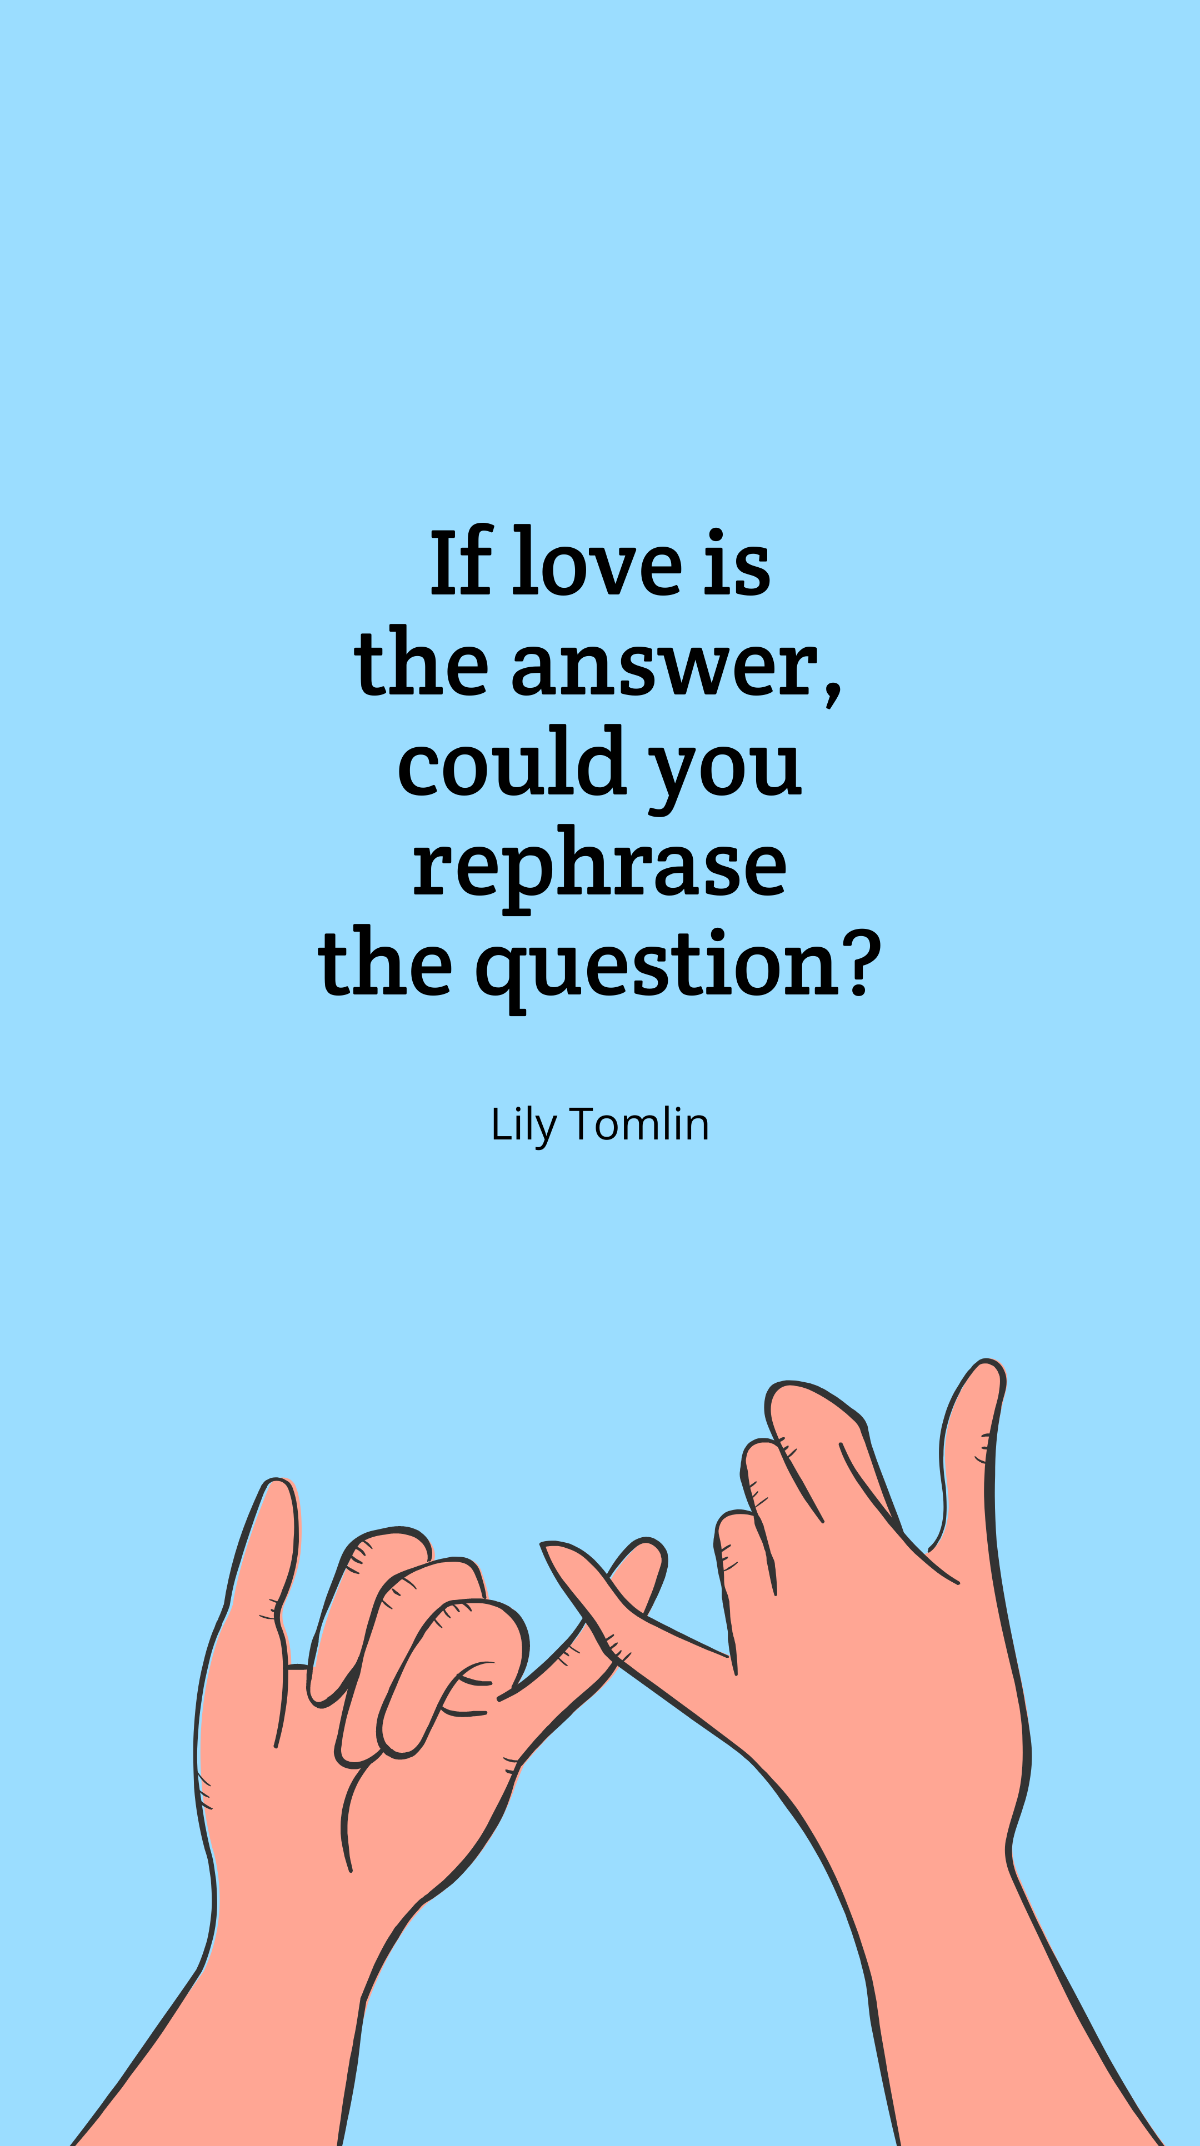 Lily Tomlin - “If love is the answer, could you rephrase the question?”